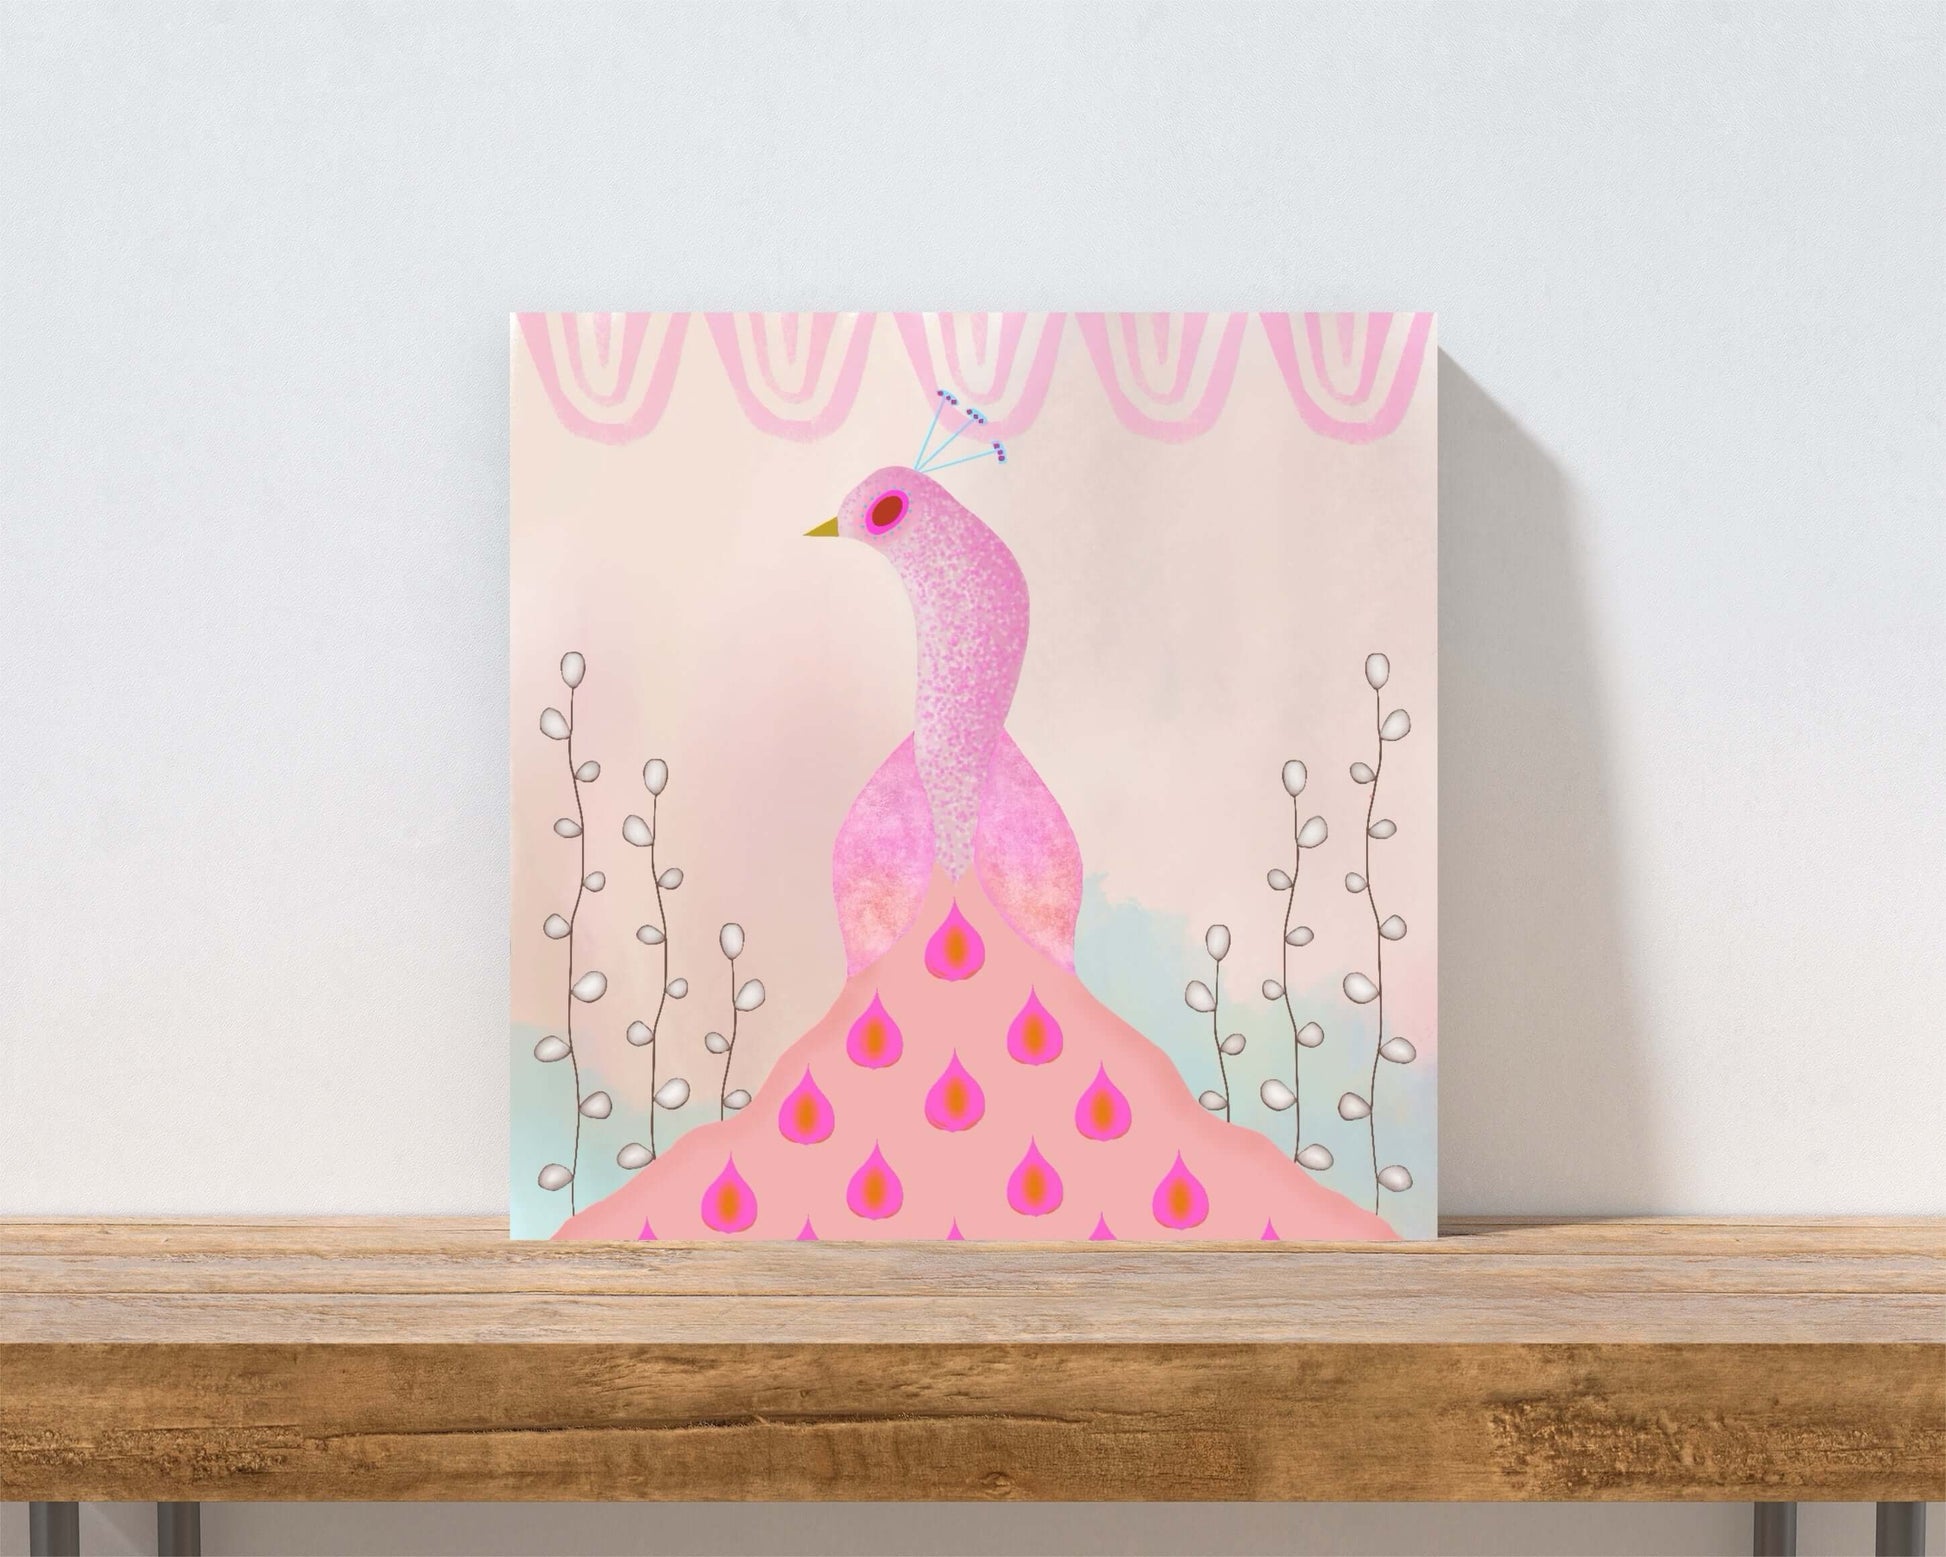 Light Pink Peacock on Beige Background with Willow Buds “Pink Peacock” Canvas Print Wall Art Small Canvas on Shelf